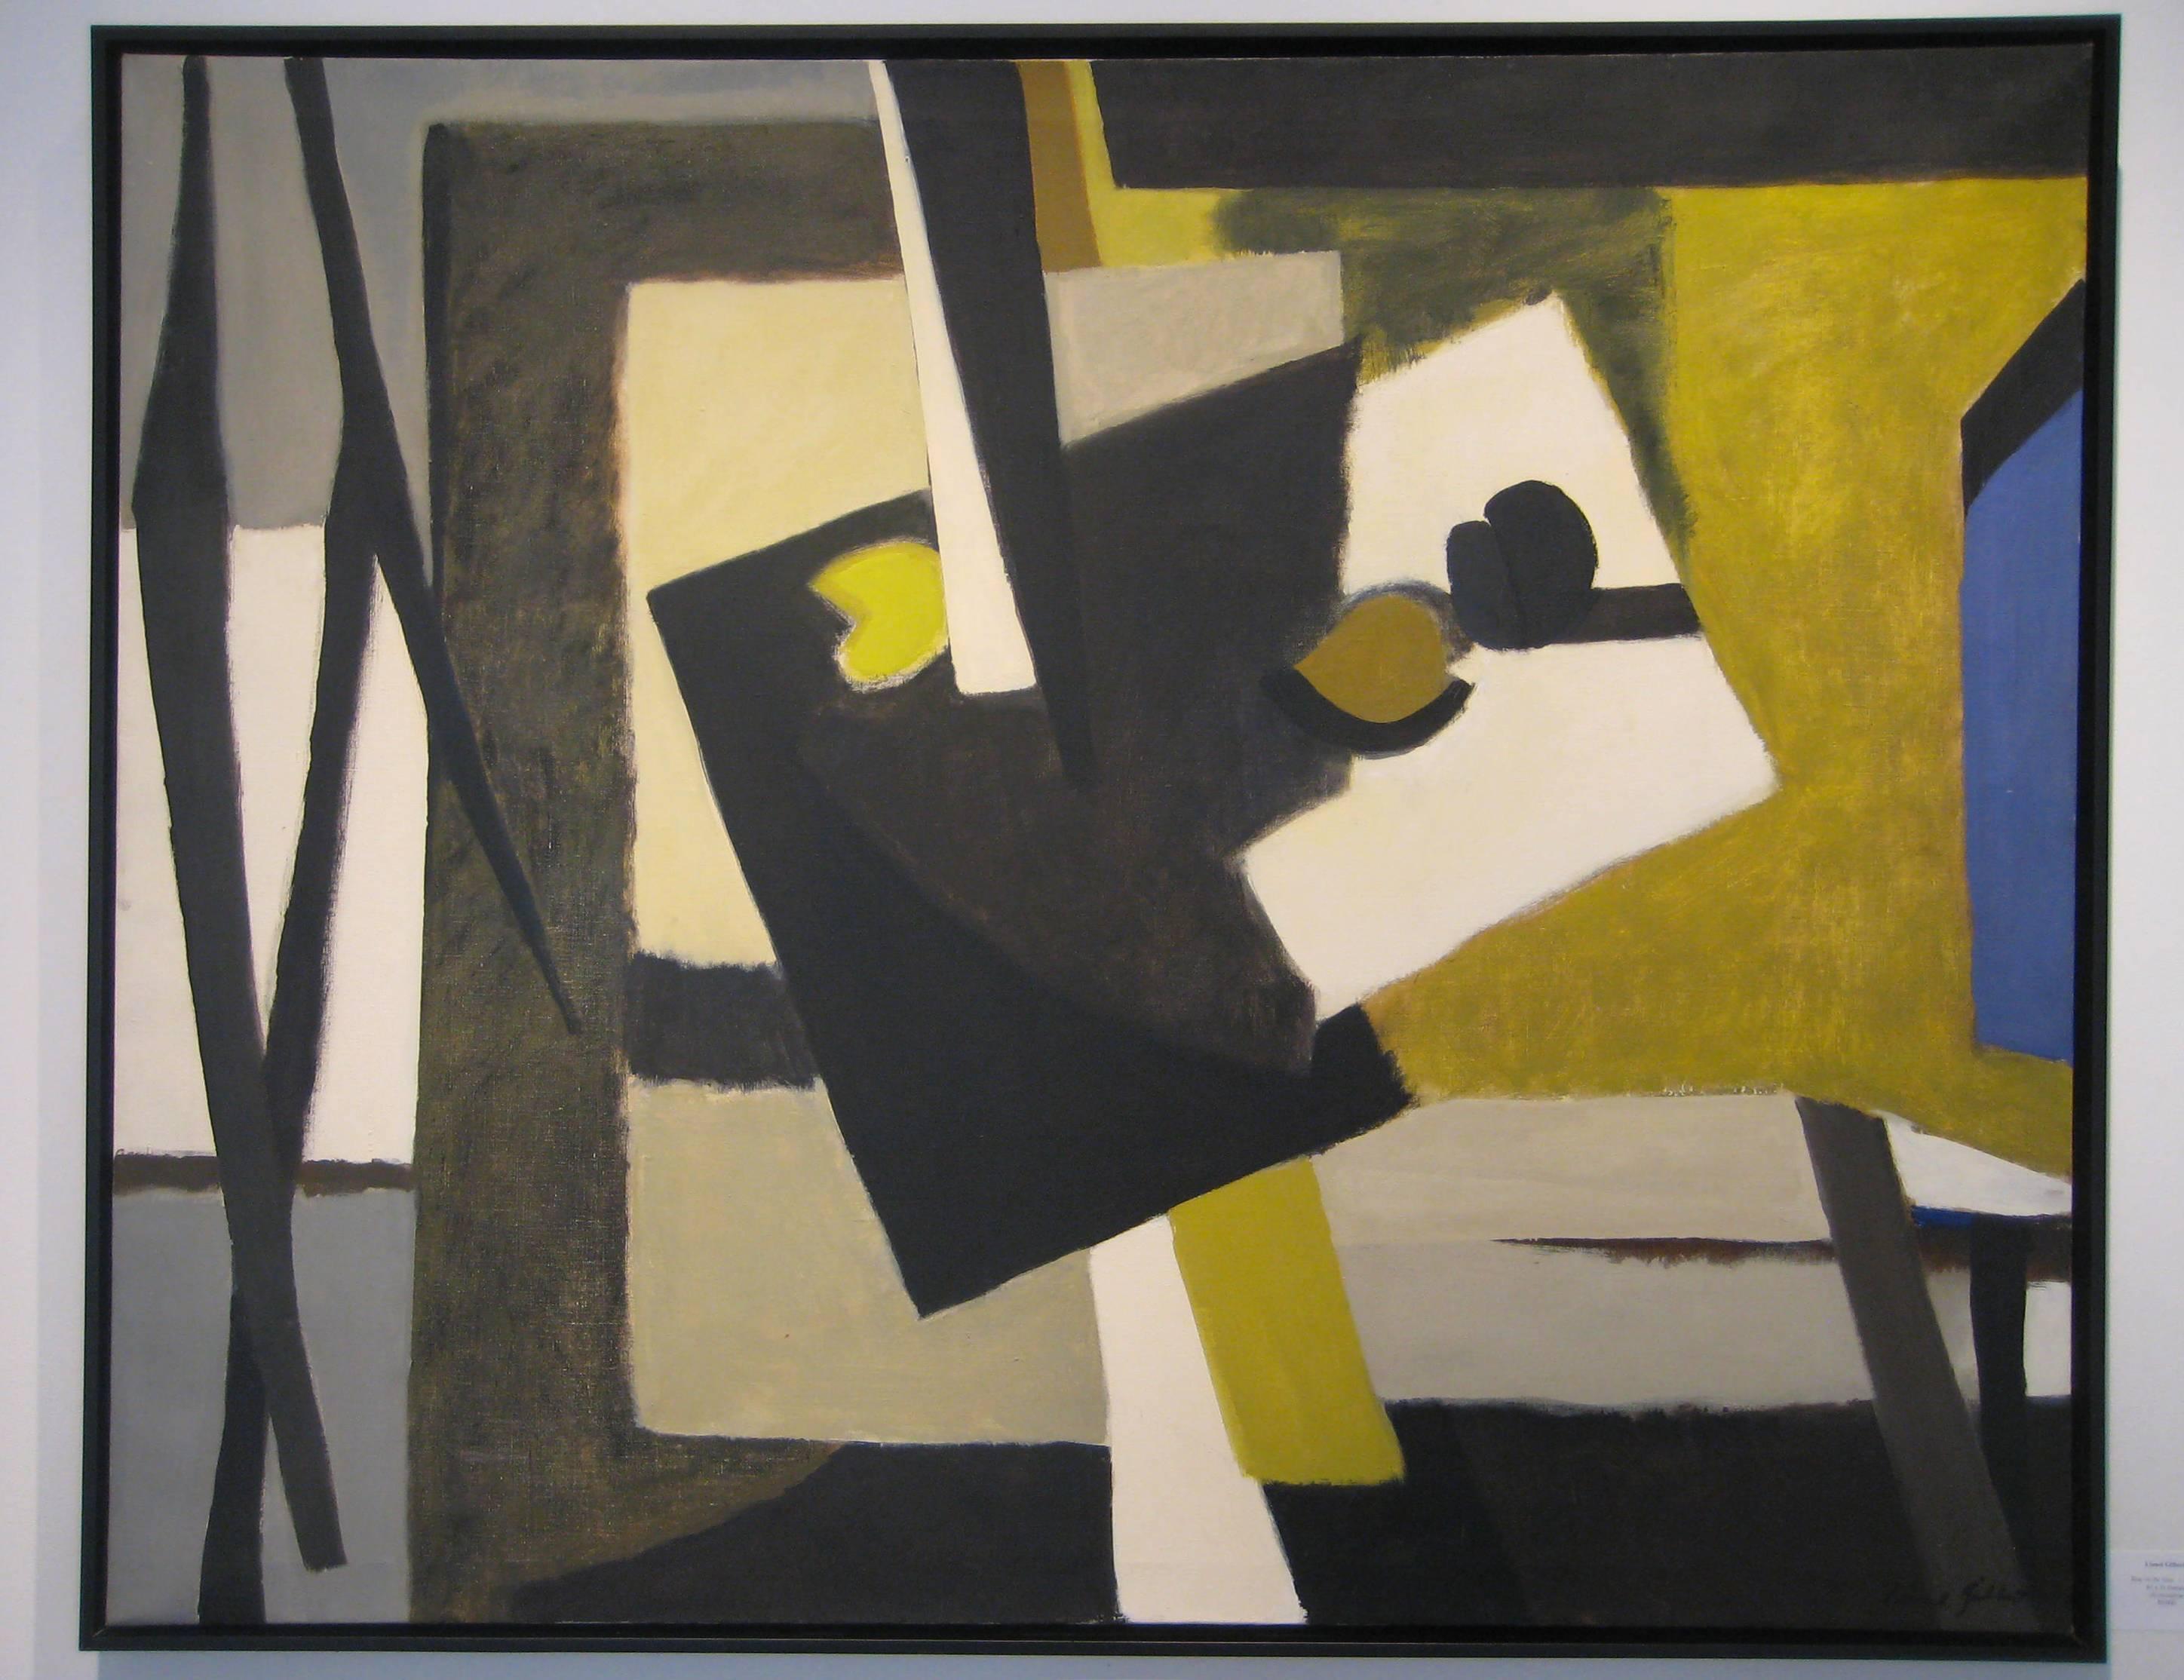 Blue on the Side: Abstract, Cubist Style Still Life Oil Painting c. 1965 (Schwarz), Still-Life Painting, von Lionel Gilbert